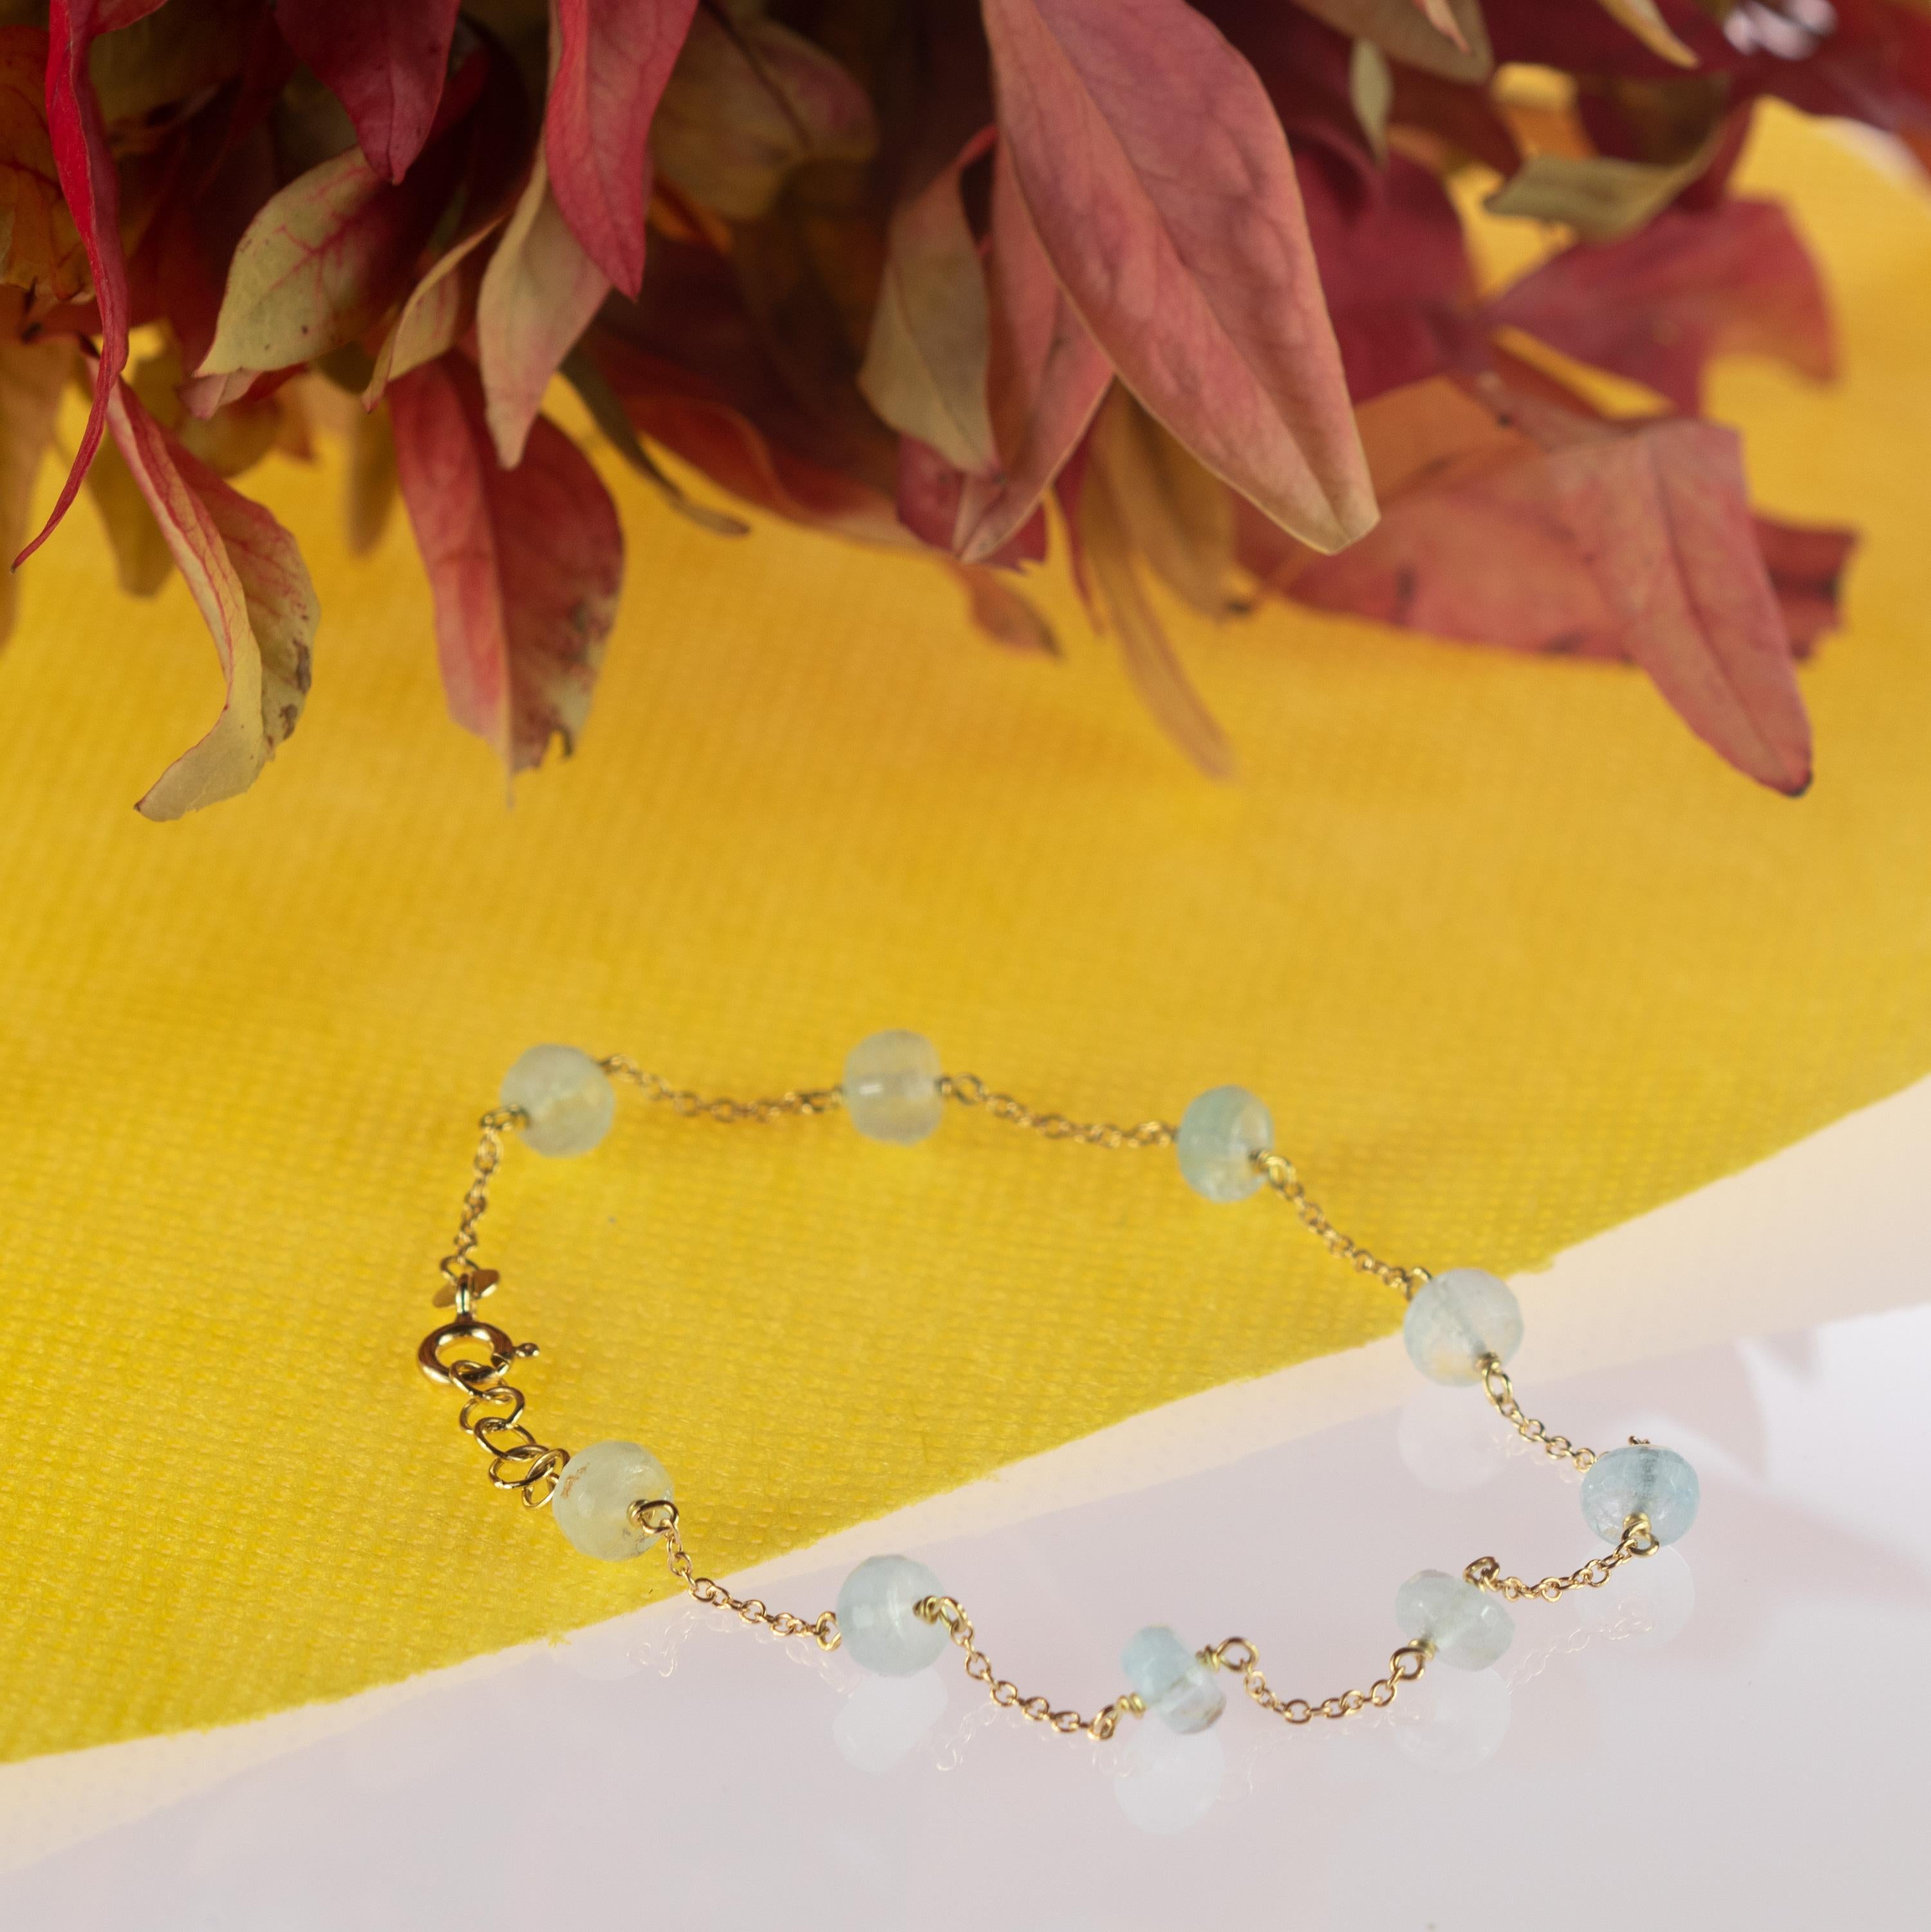 Intini Jewels signature quality on a modern and contemporary design jewel. Nine gems of top quality of aquamarine embellish a delicate 18 karat yellow gold chain bracelet.

An elegant touch of glamour at your fingertips. Let yourself be tempted by a